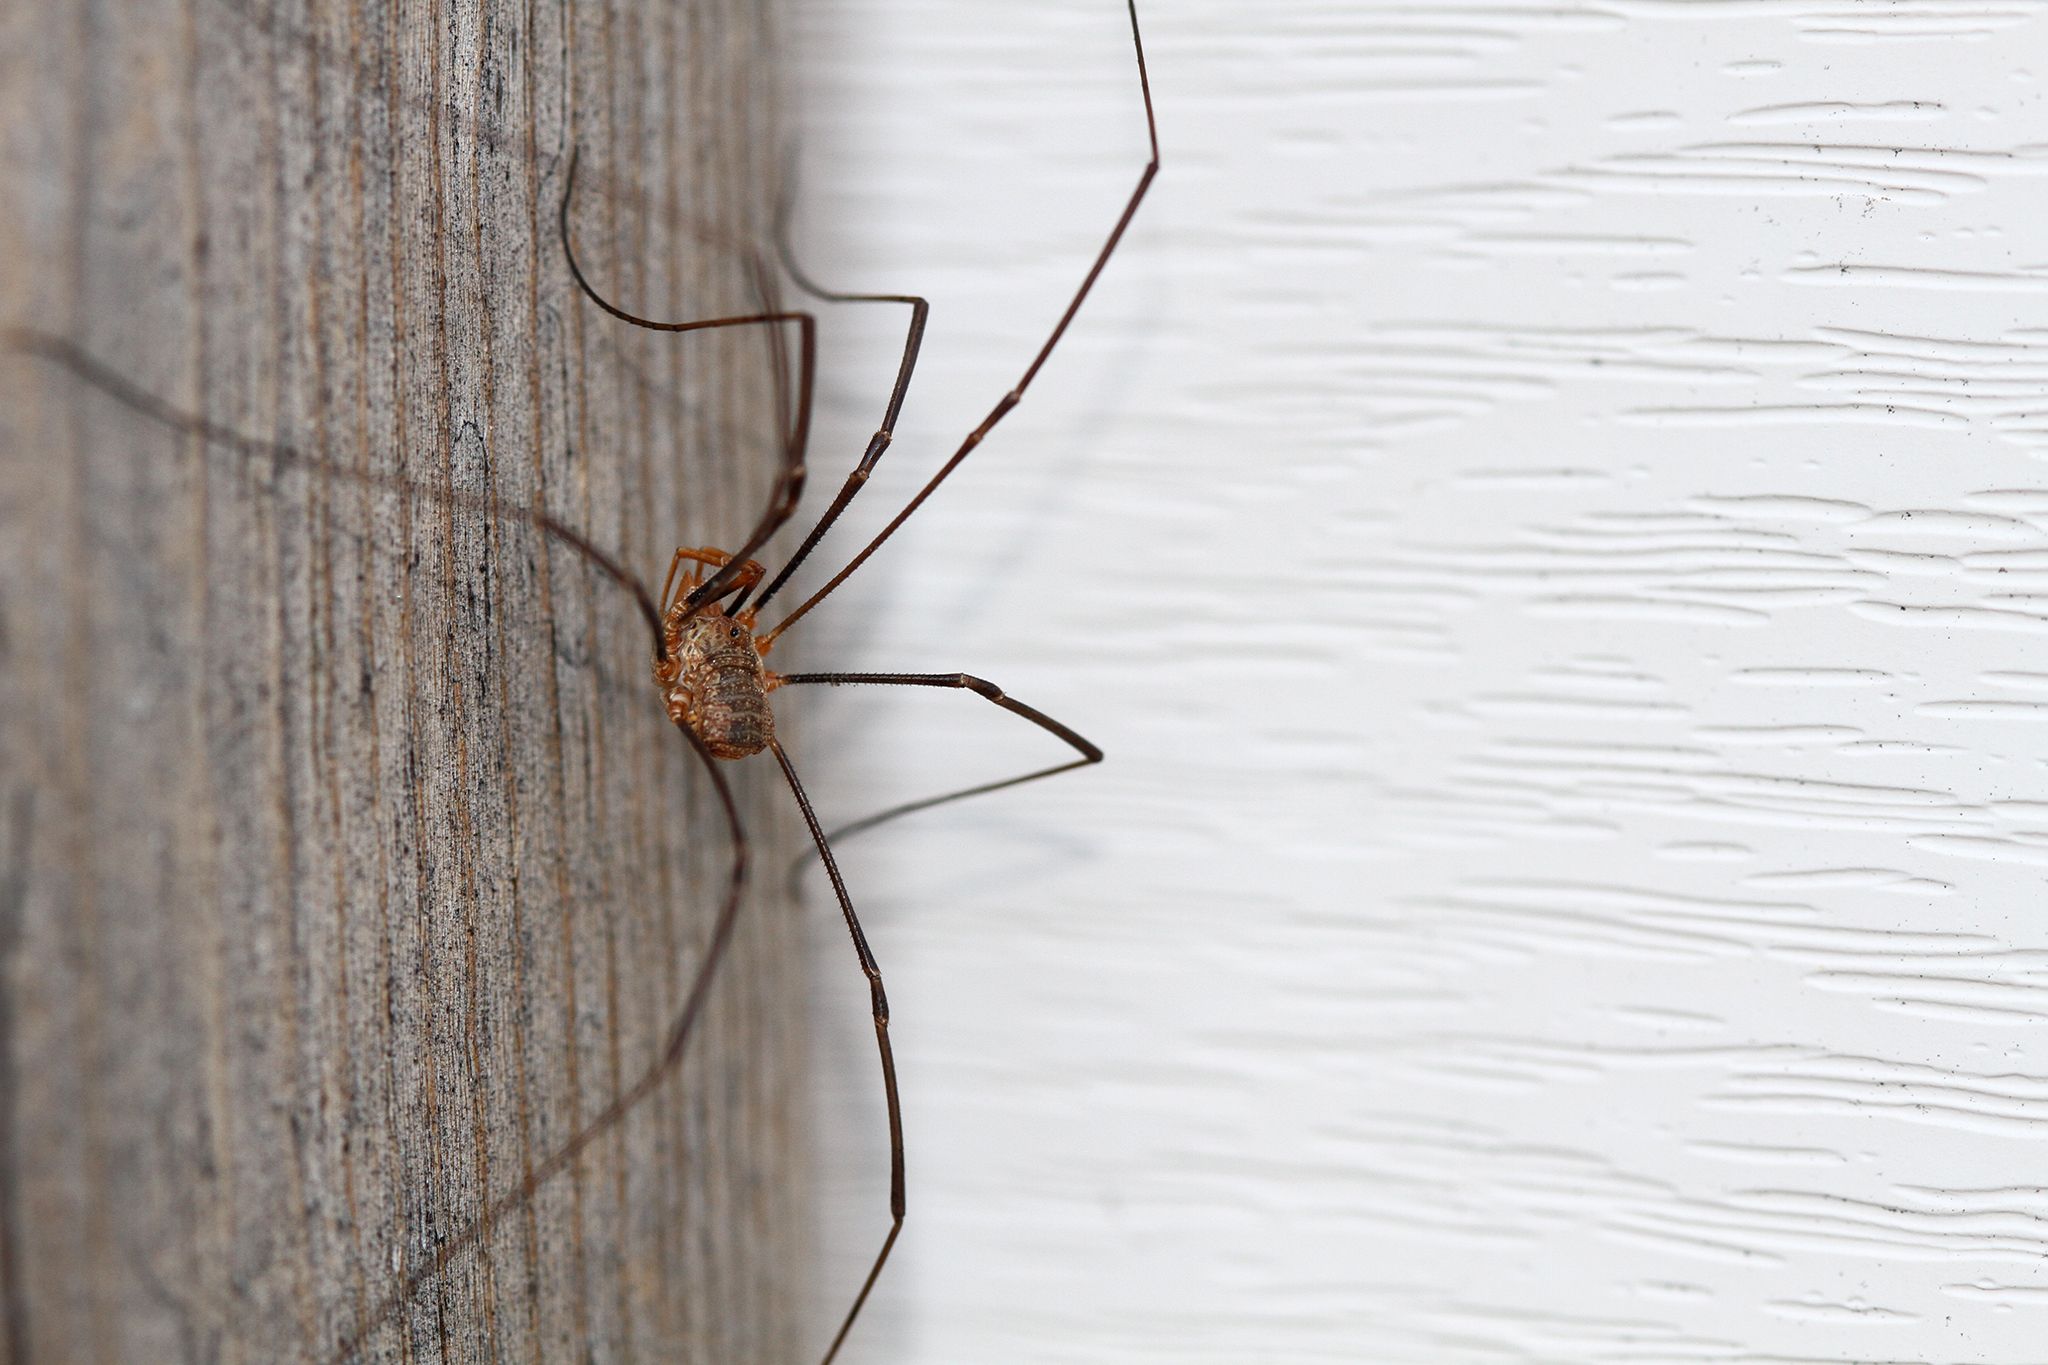 Ancient Daddy Longlegs Had Extra Set of Eyes